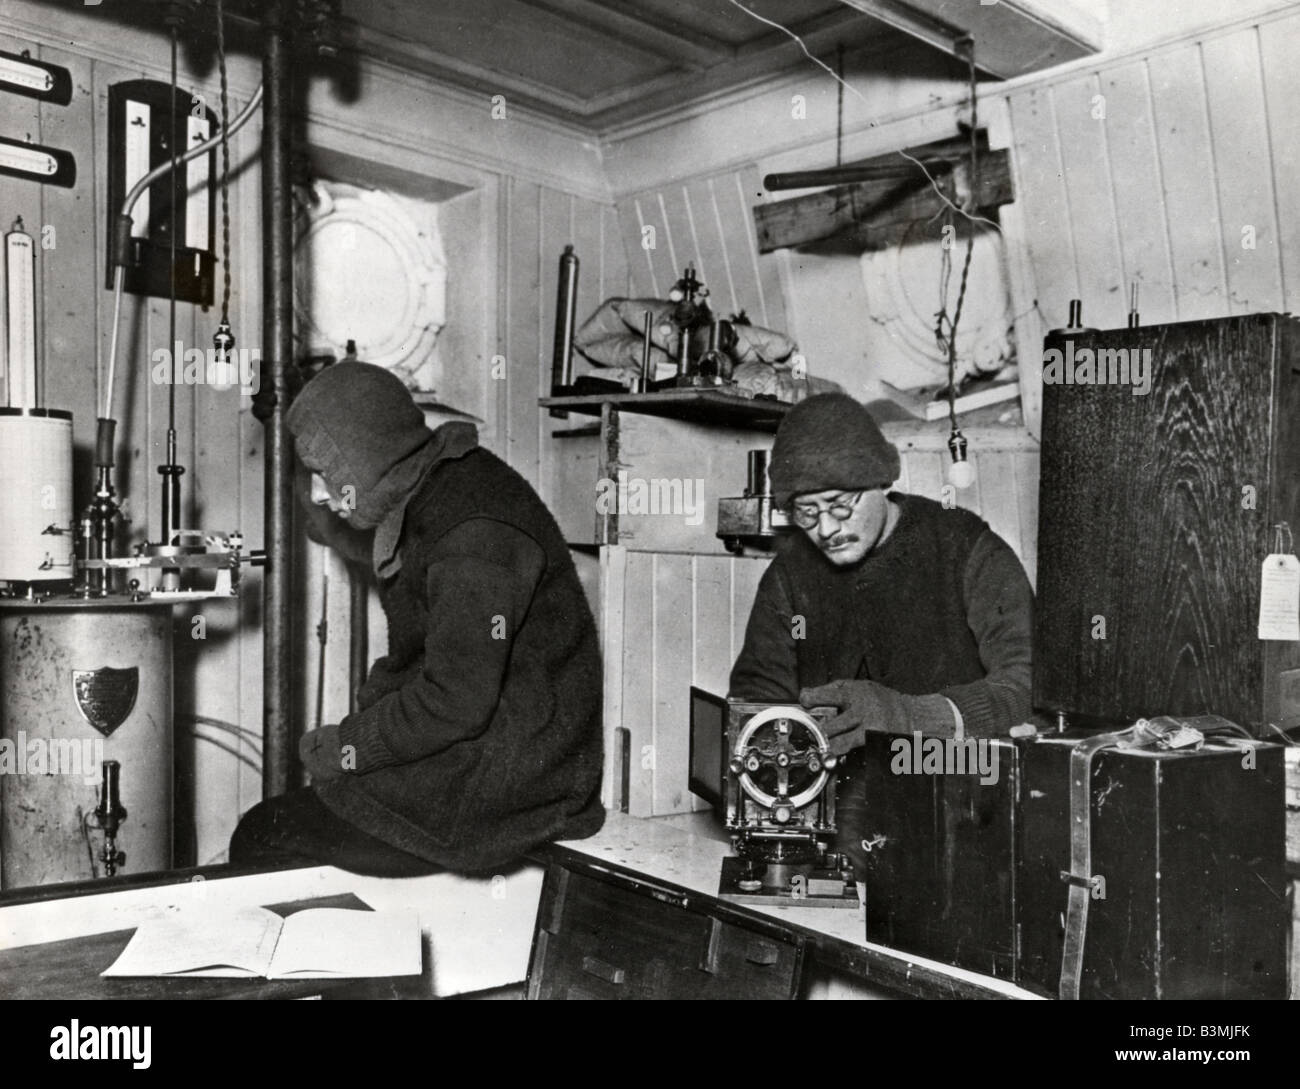 SIR ERNEST SHACKLETON  1914 Antarctic Expedition: inside The Rockery laboratory. Photo Frank Hurley  - see Description below Stock Photo